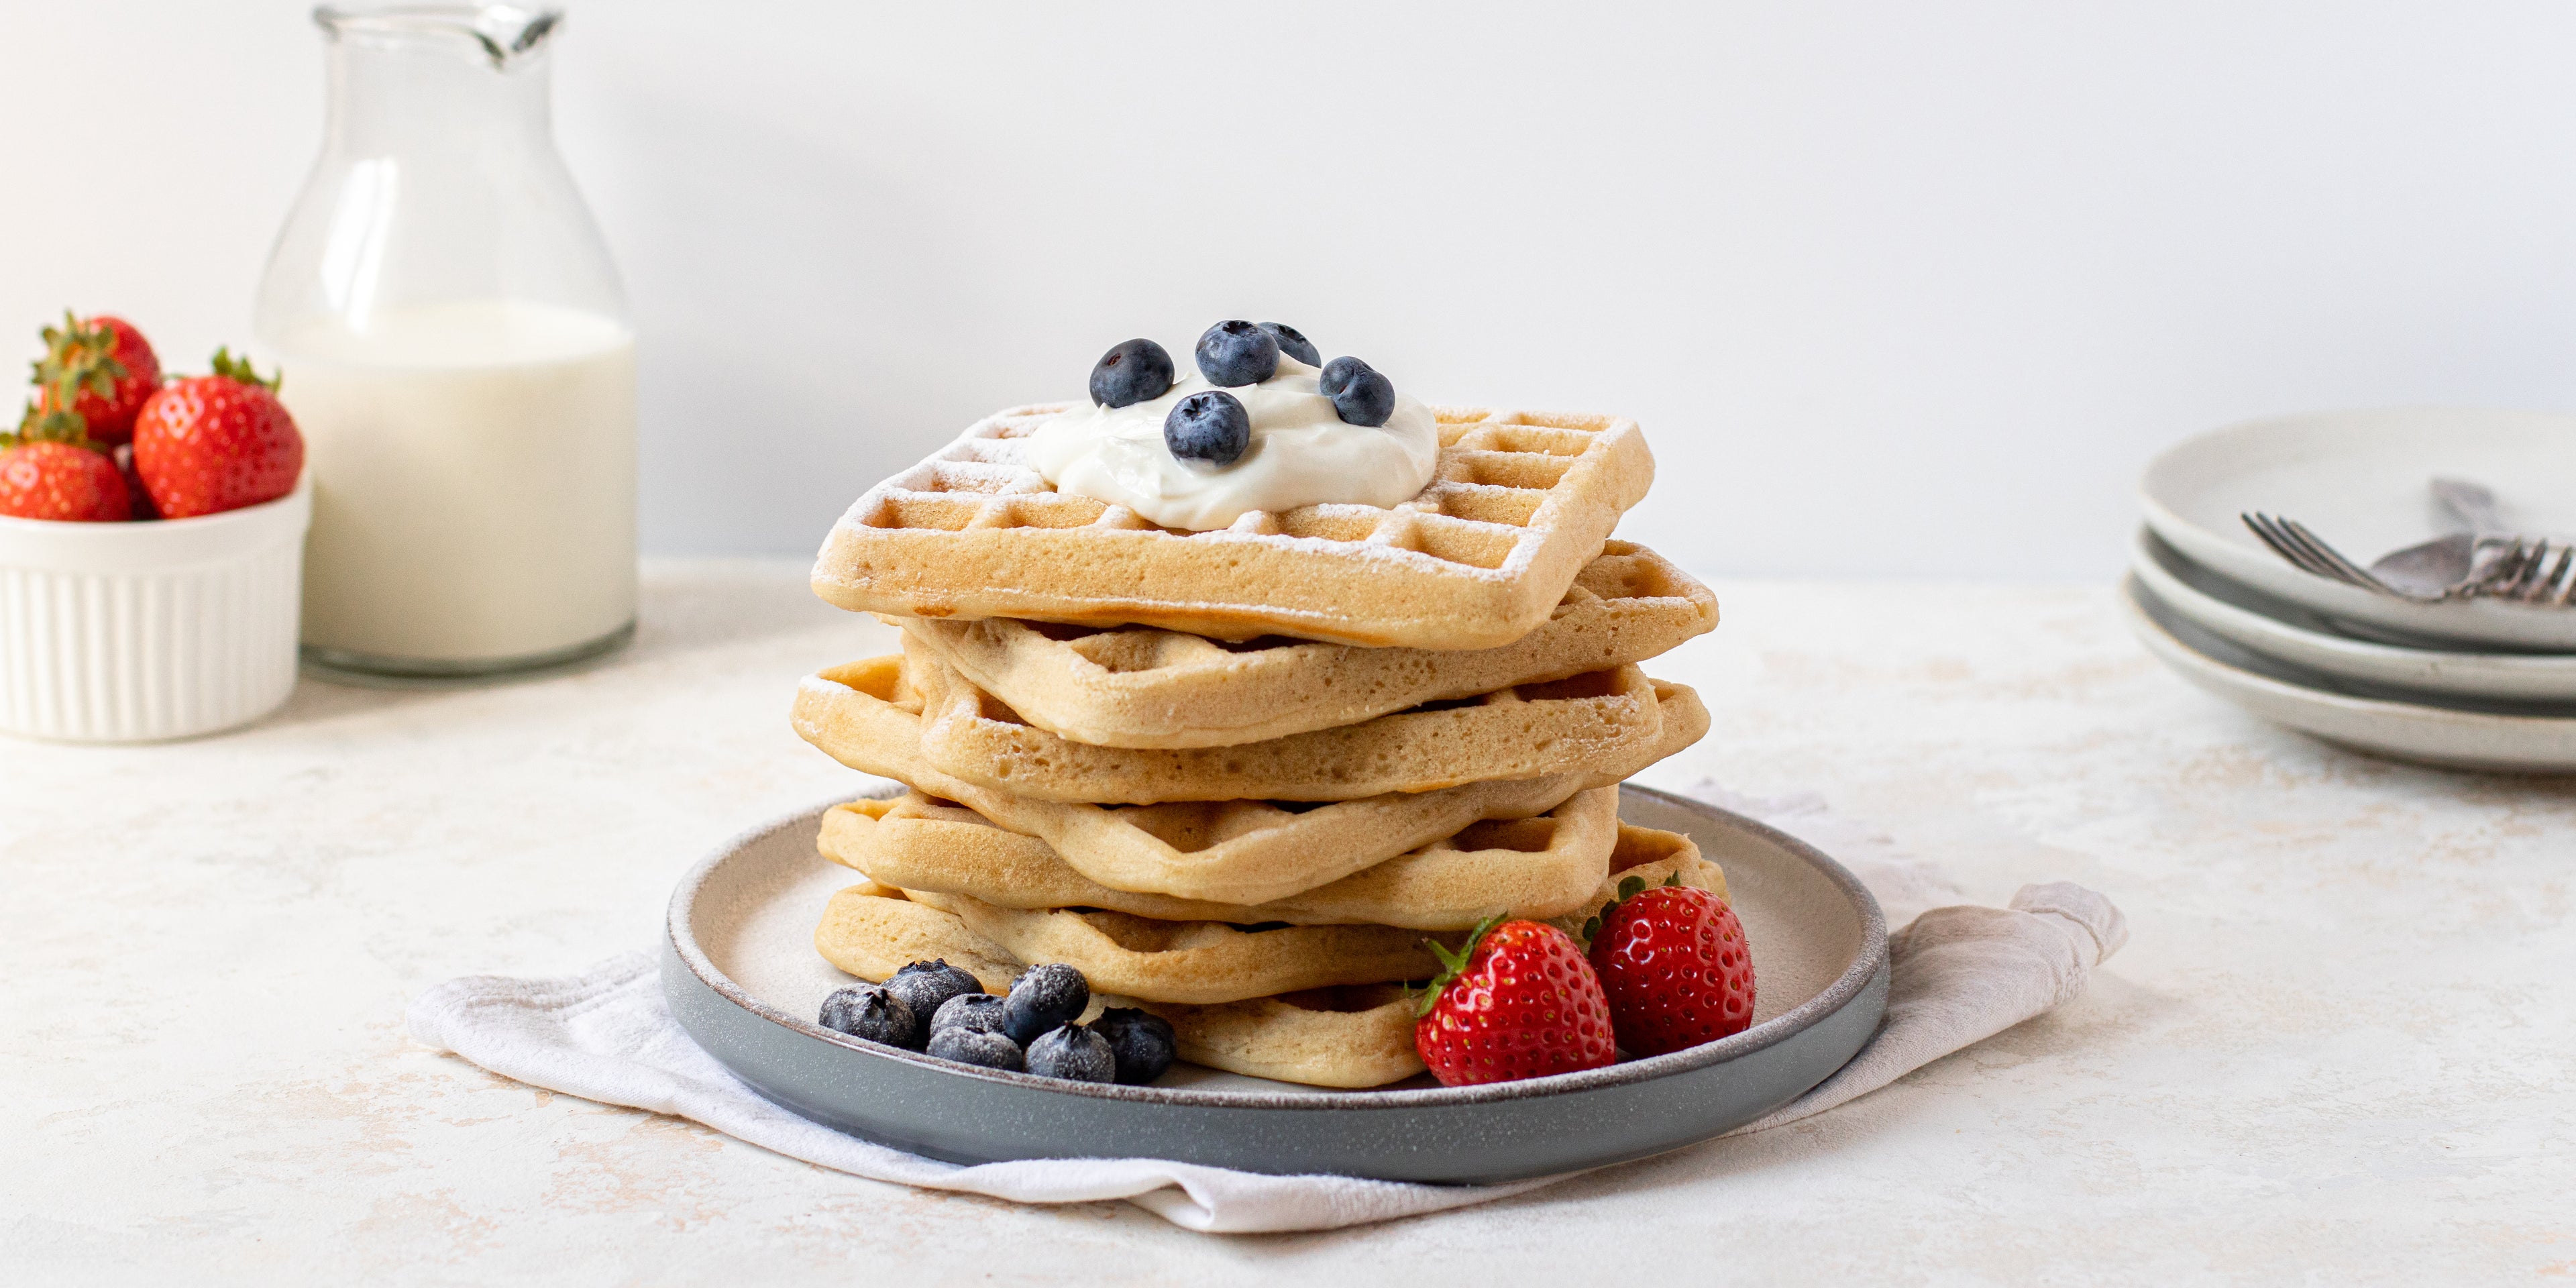 Side on view of a stack of vegan gluten free waffles topped with berries